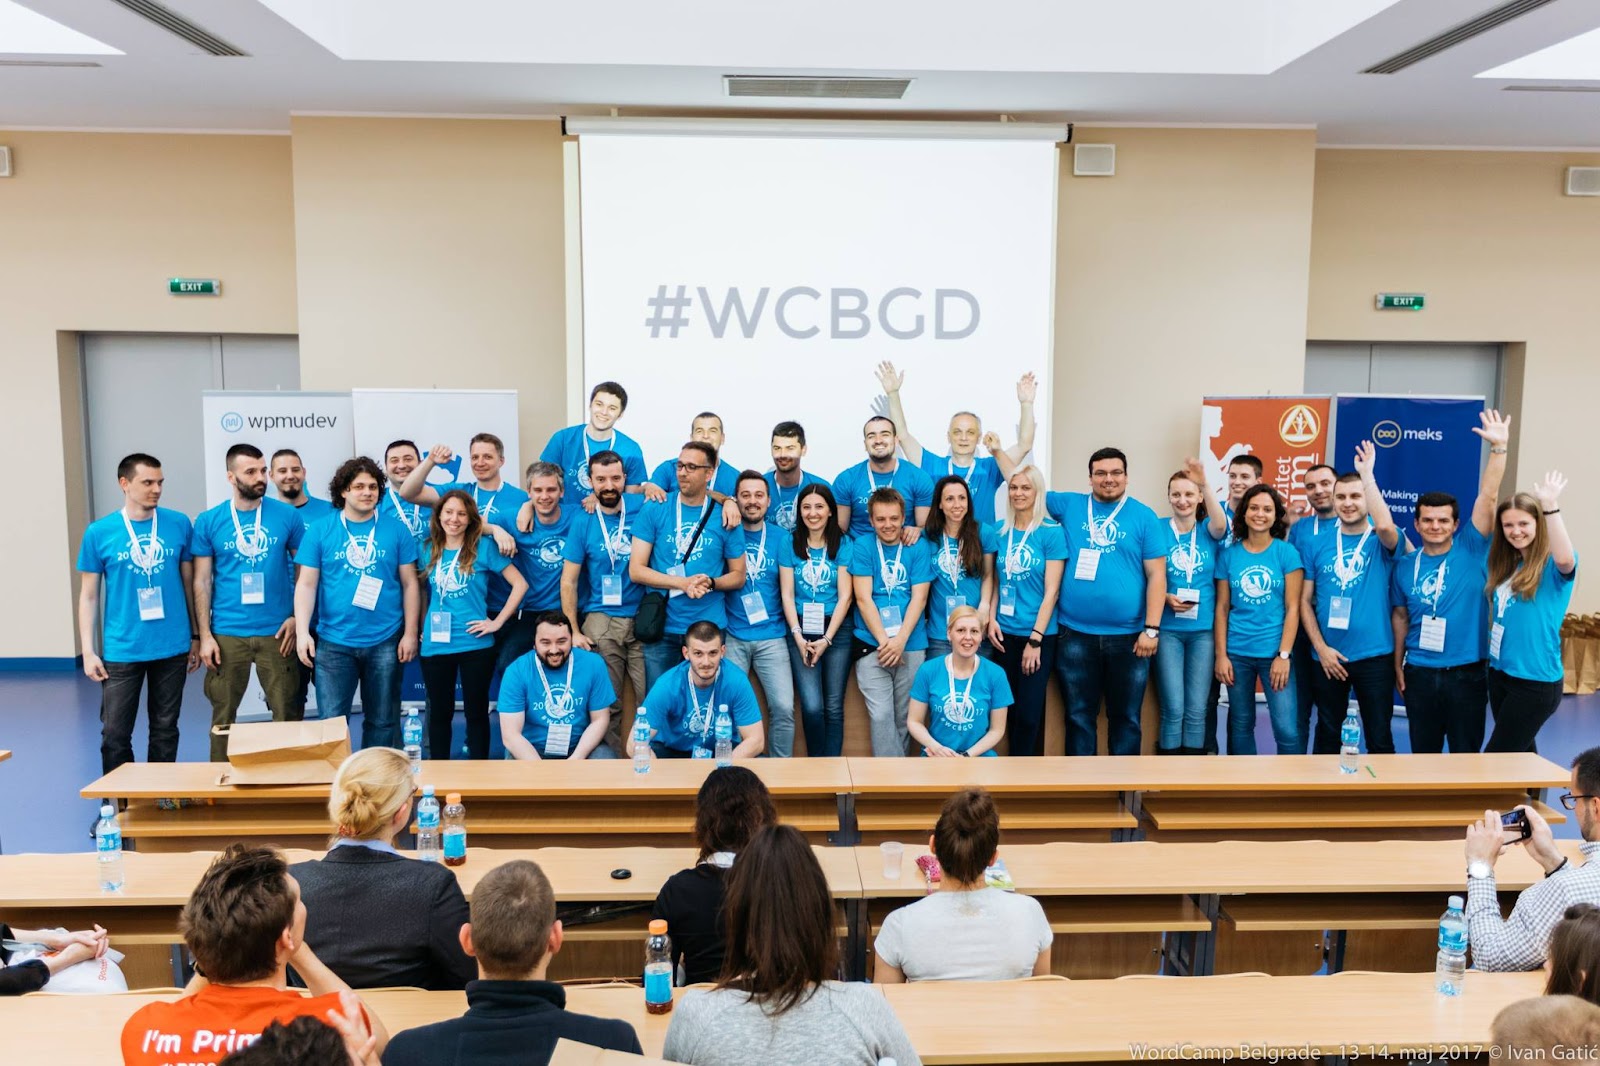 WCBGD group picture